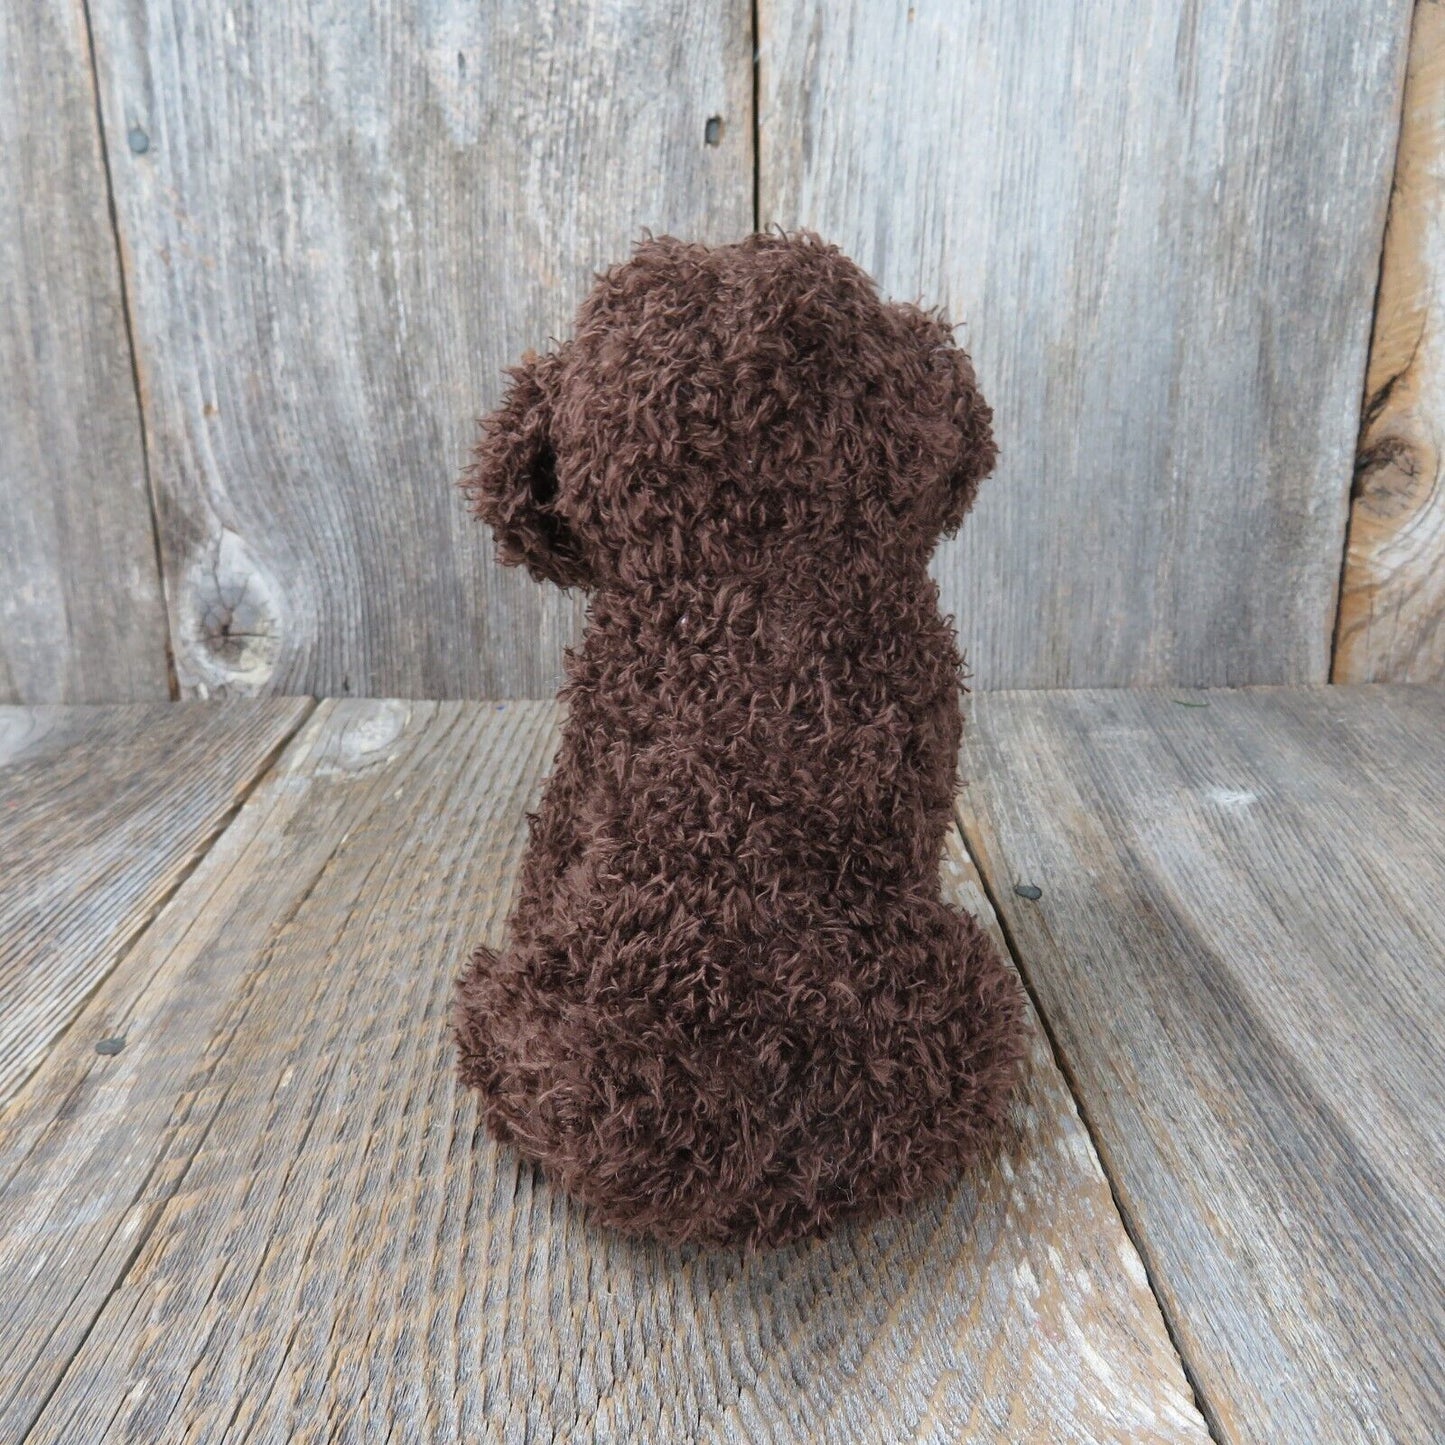 Curly Brown Dog Plush Soft Toy Love Pet Puppy Stuffed Animal Tag Plastic Nose